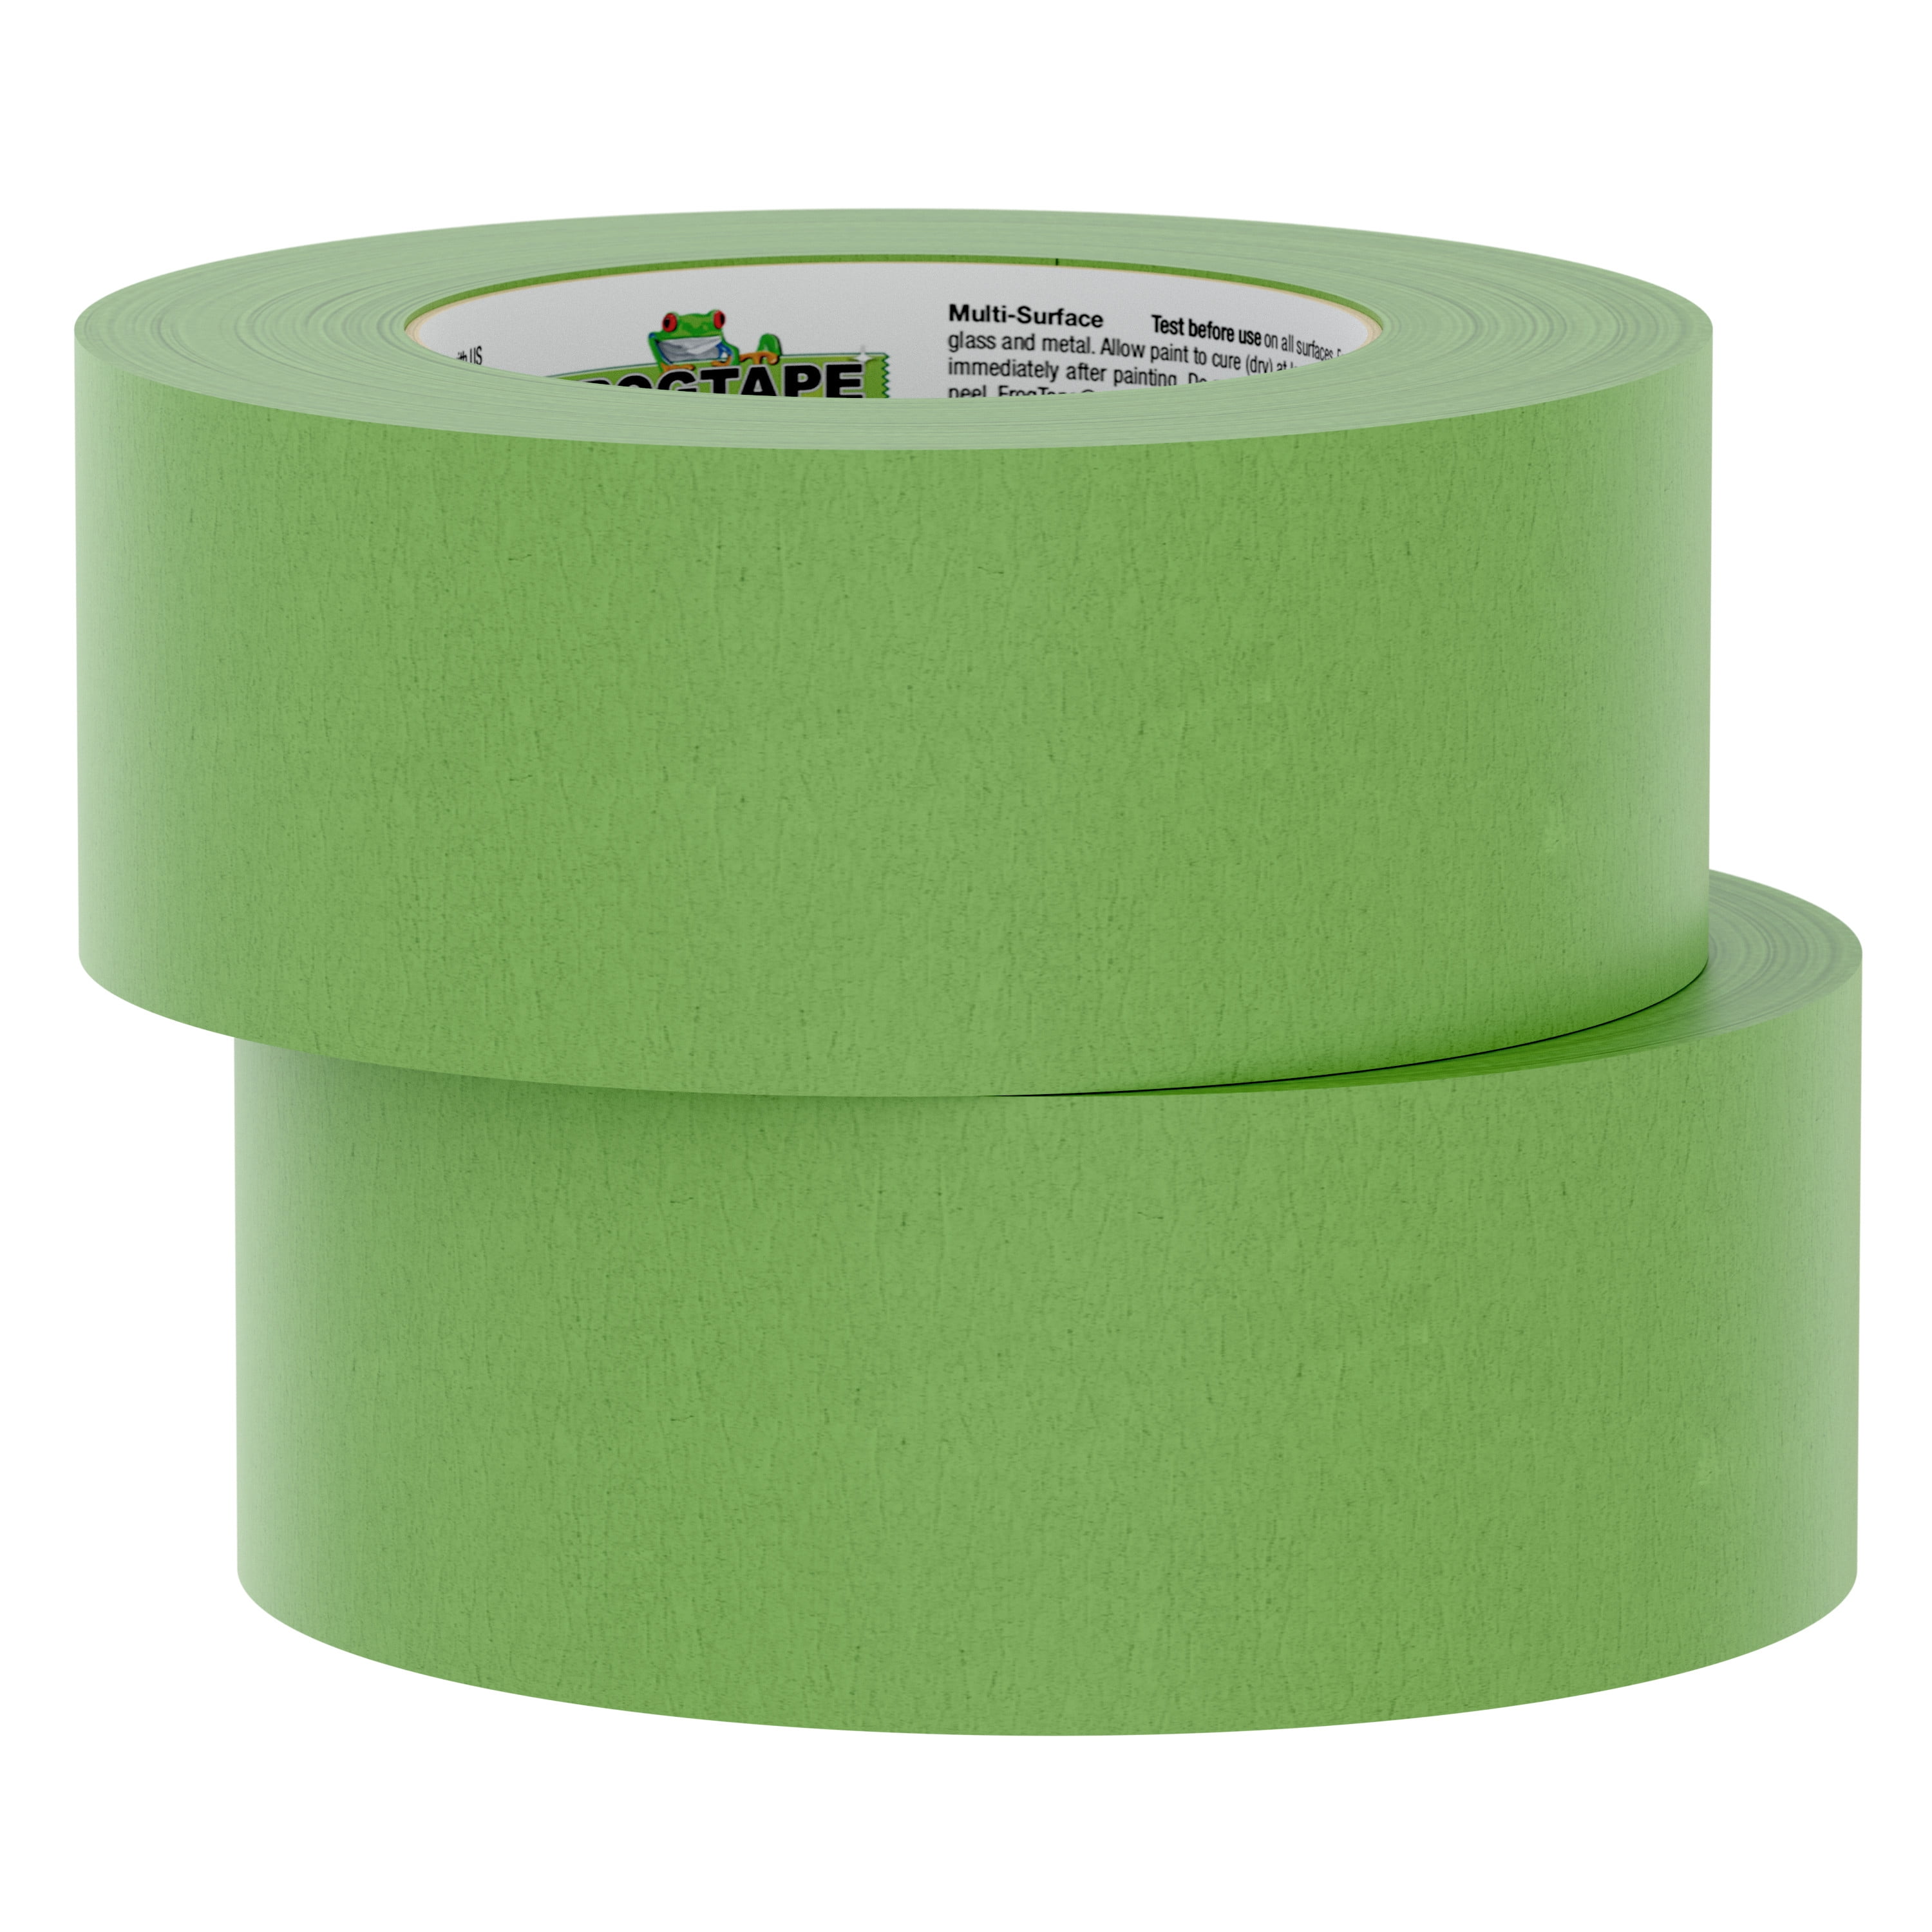 Painters Tape 50m x 0.5cm-5cm Masking Washi Easy Release No Trace Tape for  Multi-Surfaces